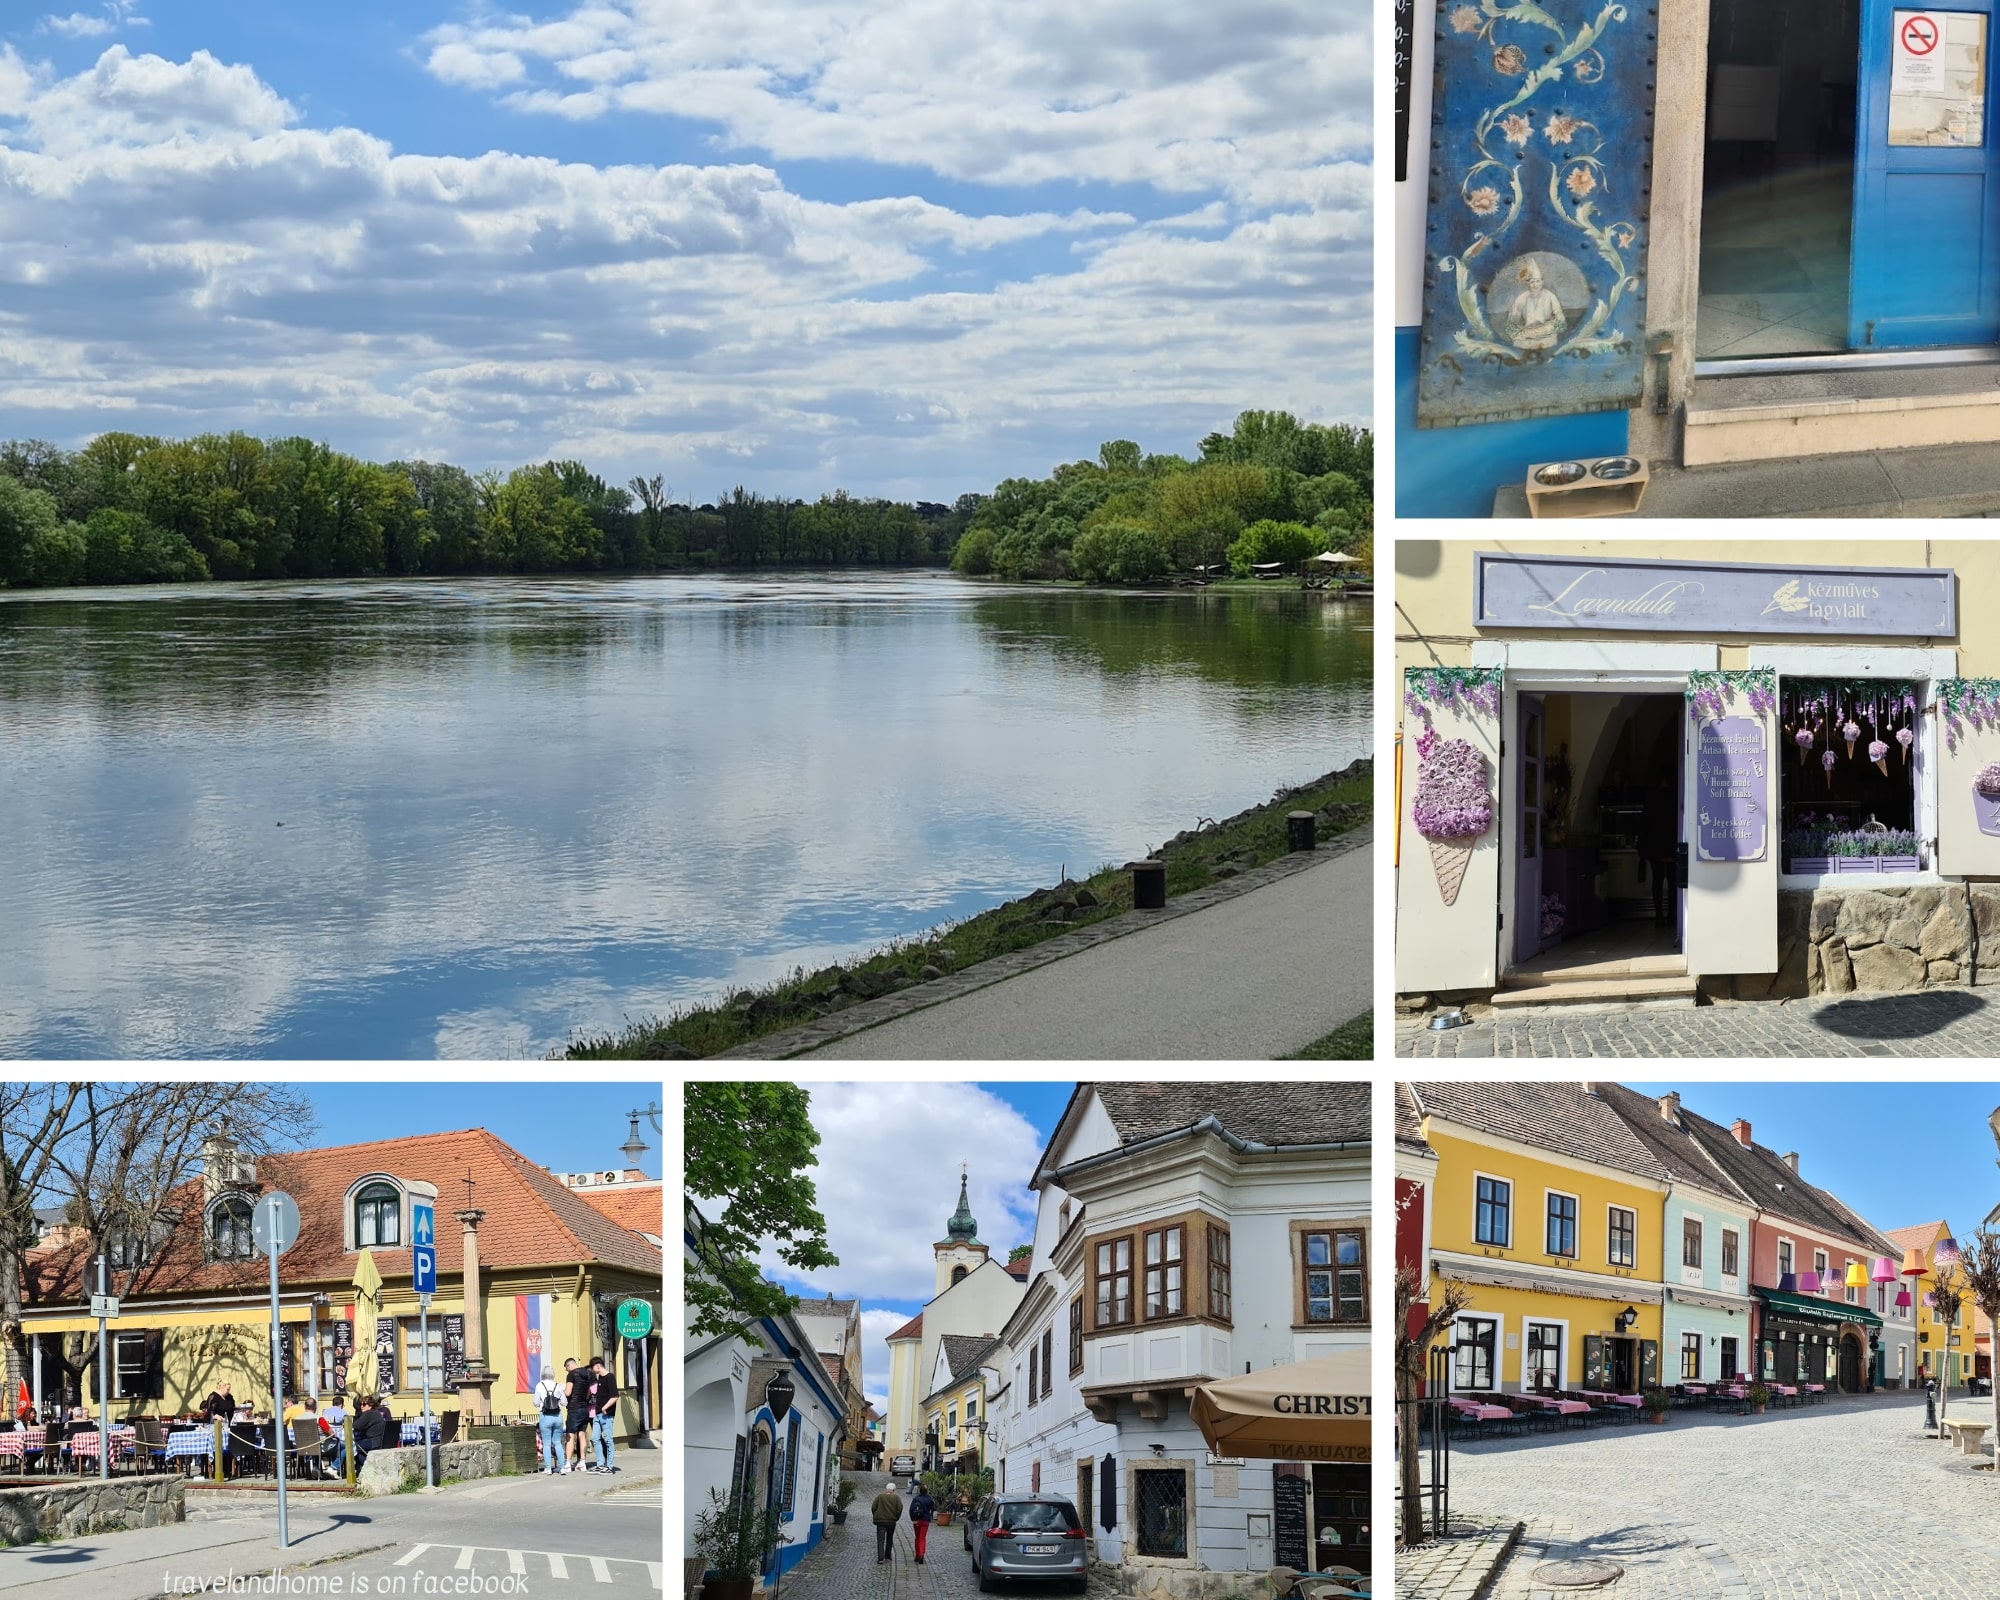 Szentendre tourism, things to do in Szentendre, best places to visit in Hungary, day trip from Budapest